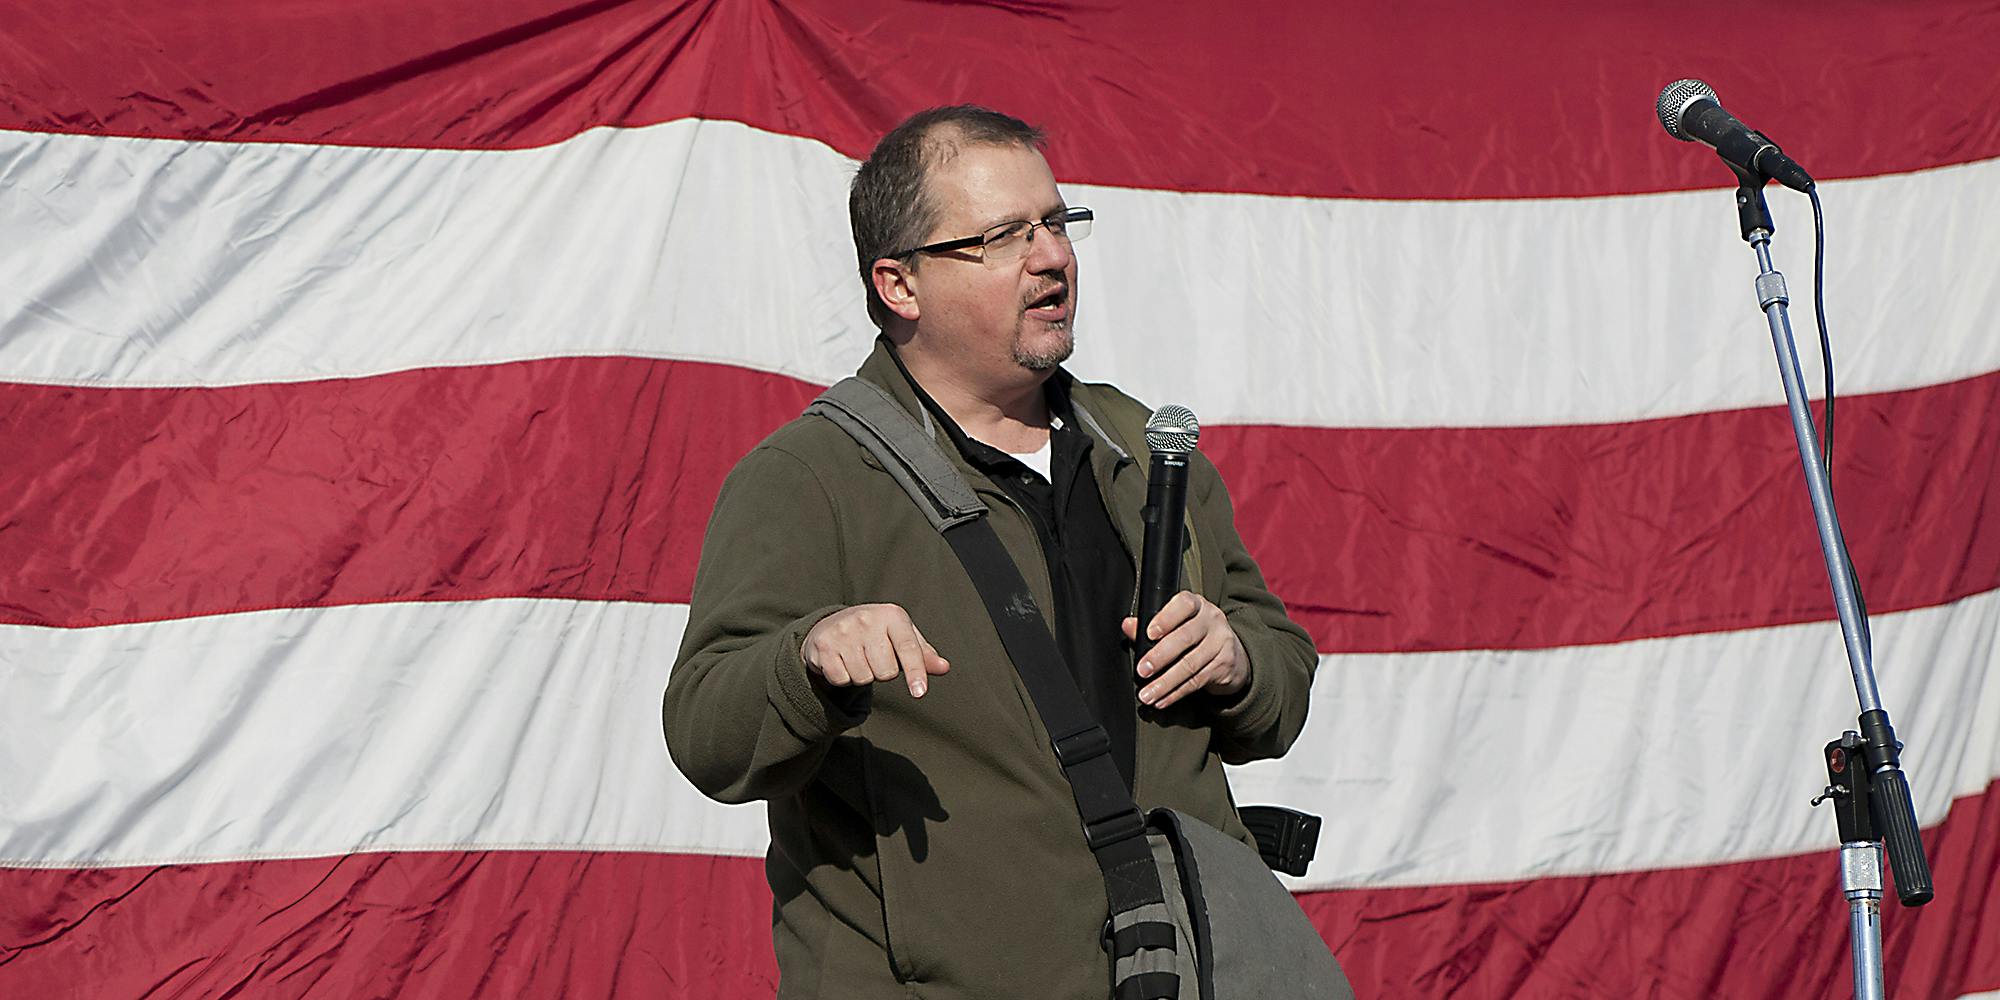  A guy in front of an American flag with microphone.